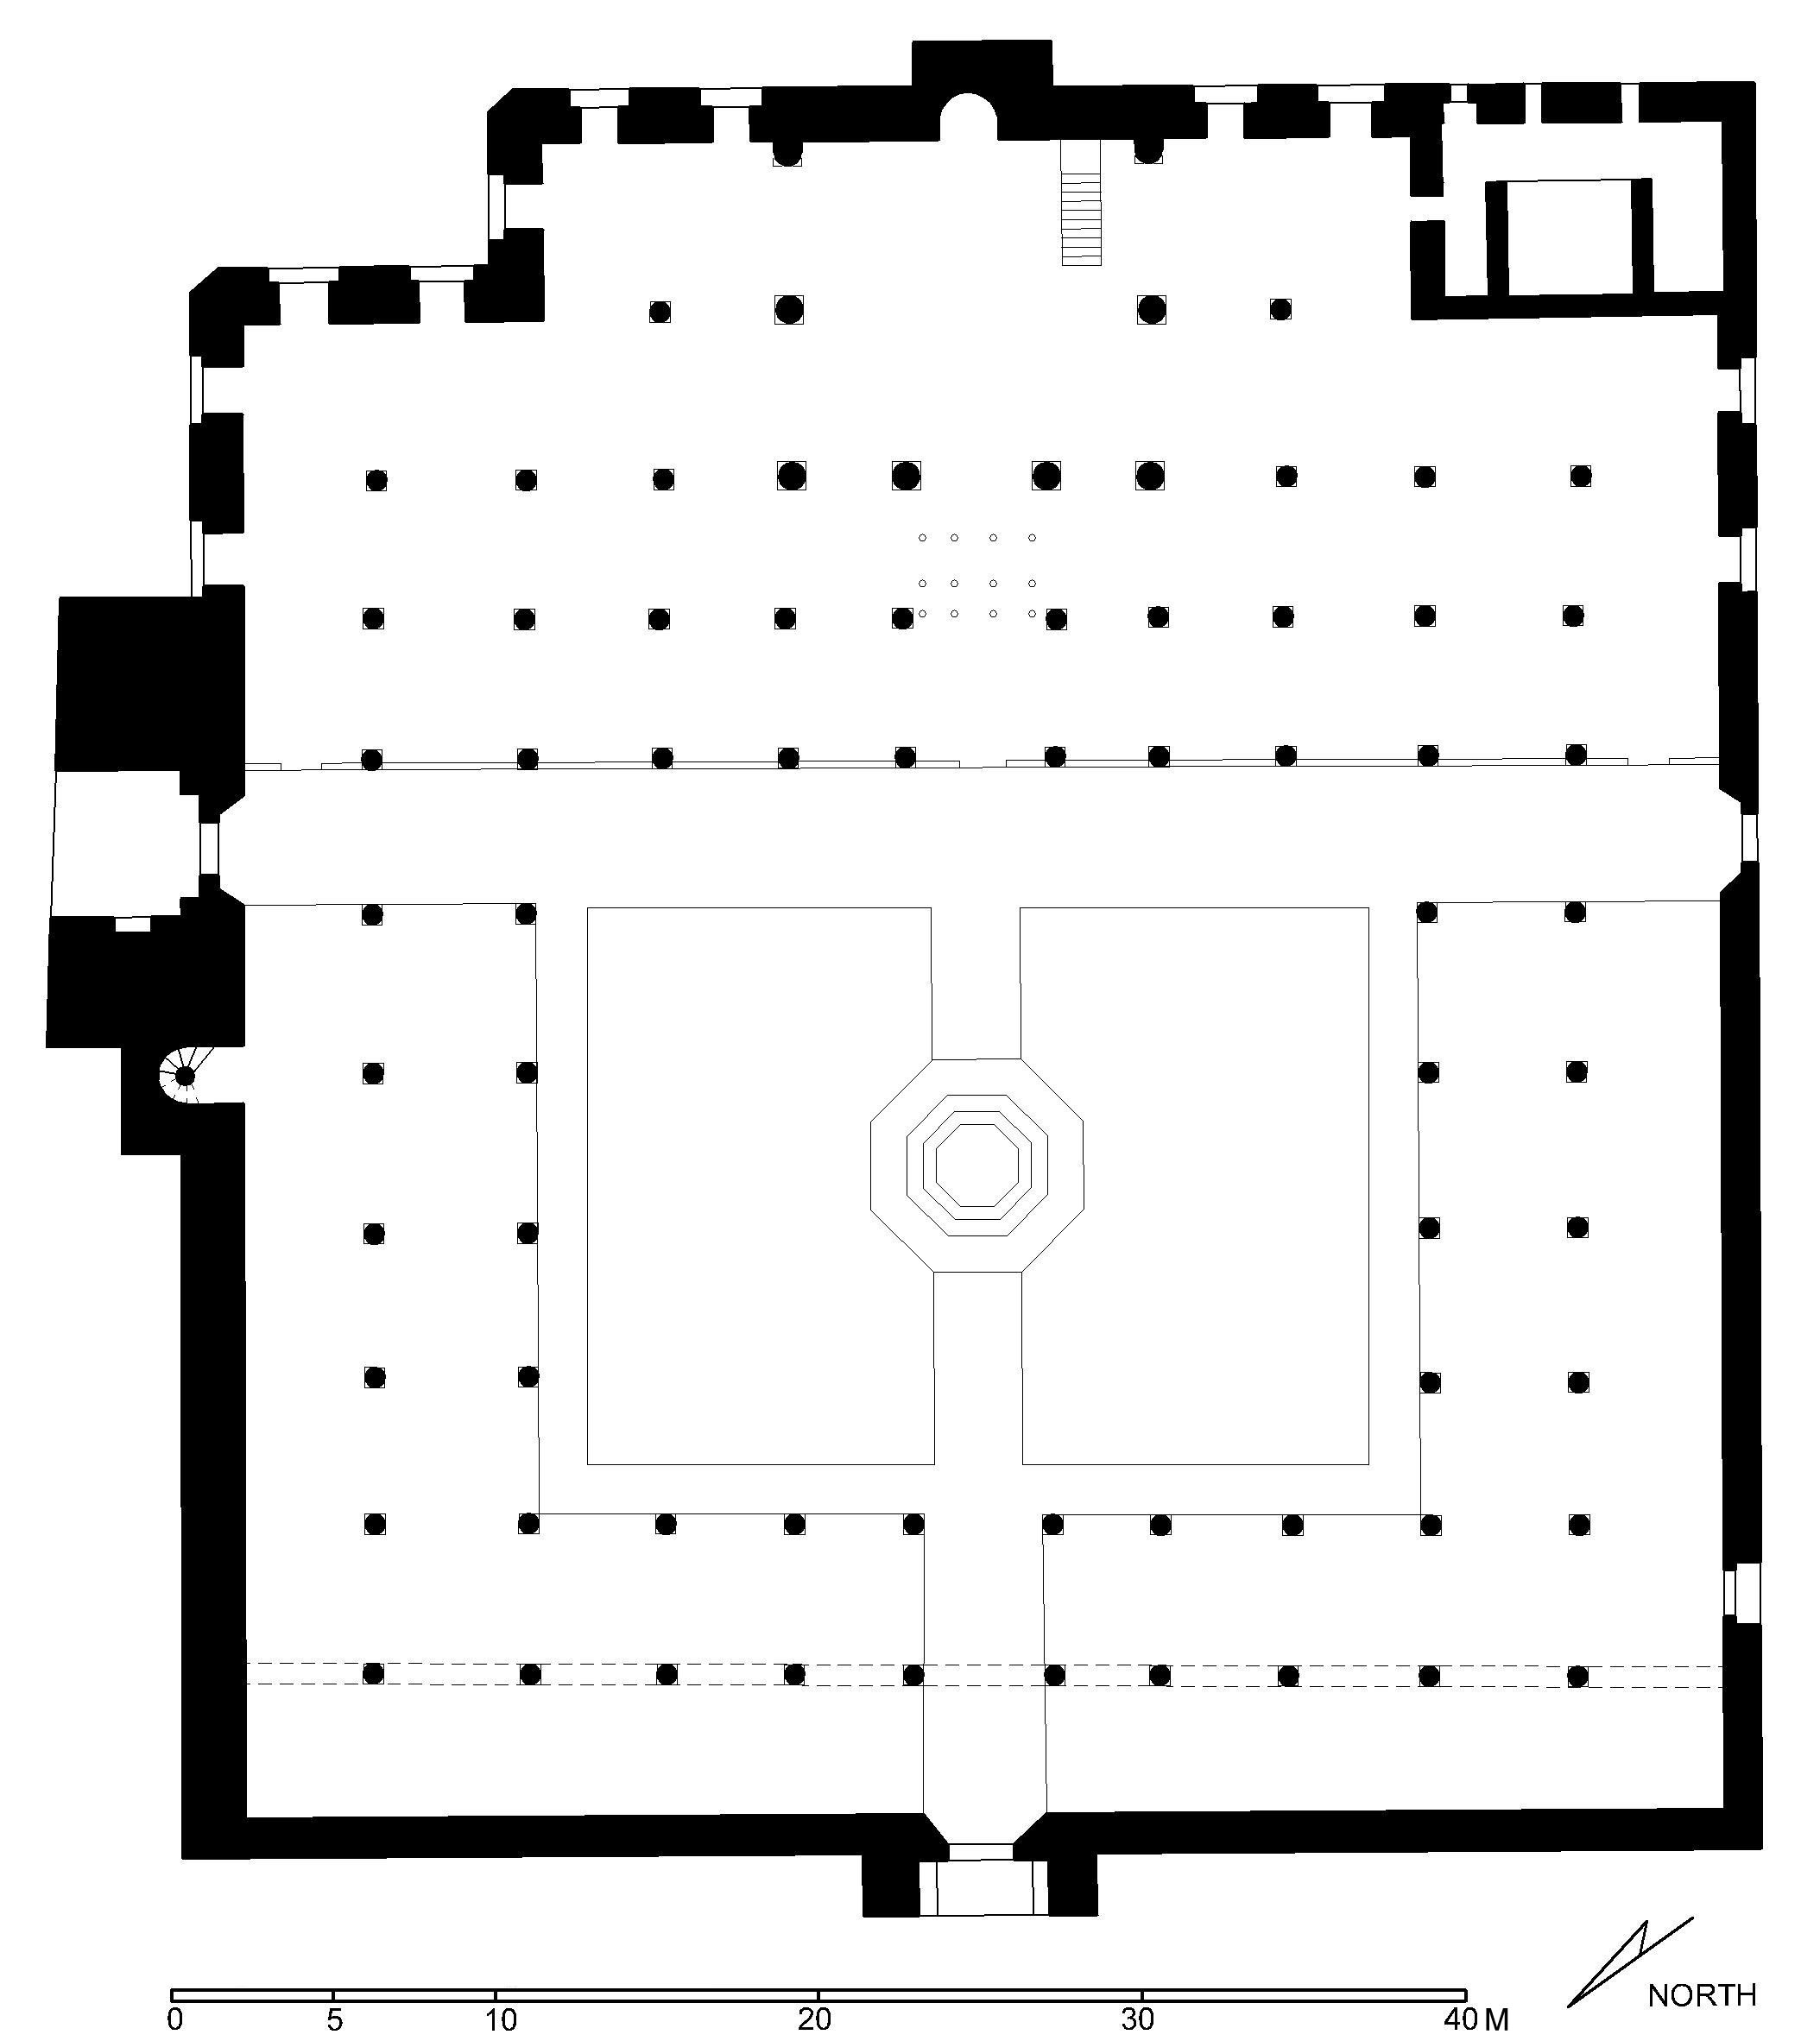 Masjid Altinbugha al-Maridani - Floor plan of mosque (after Meinecke) in AutoCAD 2000 format. Click the download button to download a zipped file containing the .dwg file. 